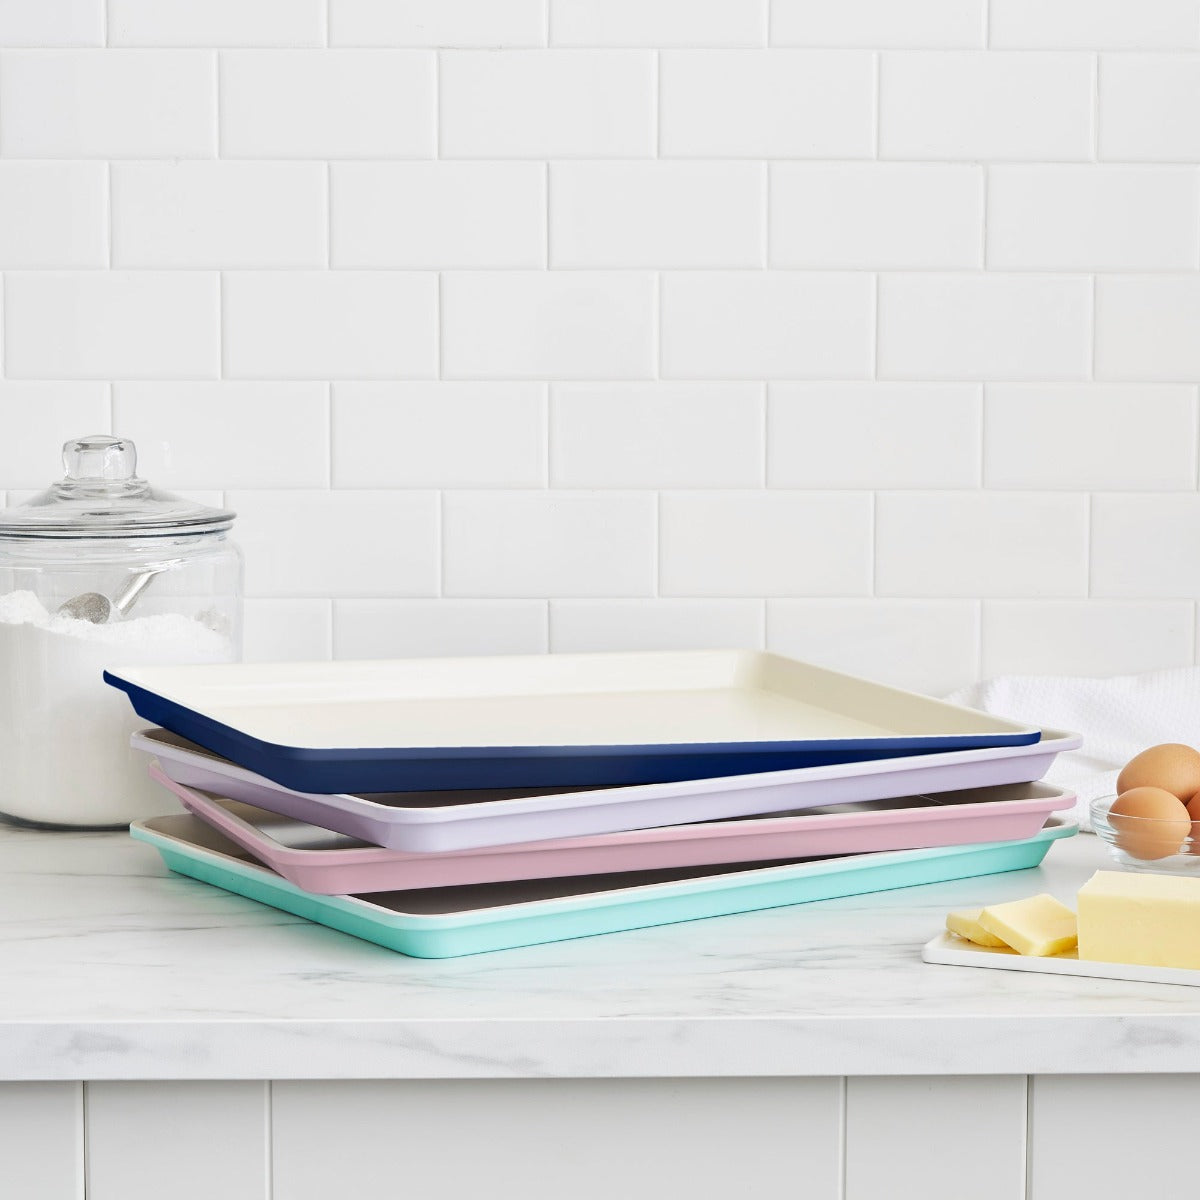 Cookie Sheets 101 – How to Clean Cookie Sheets and More